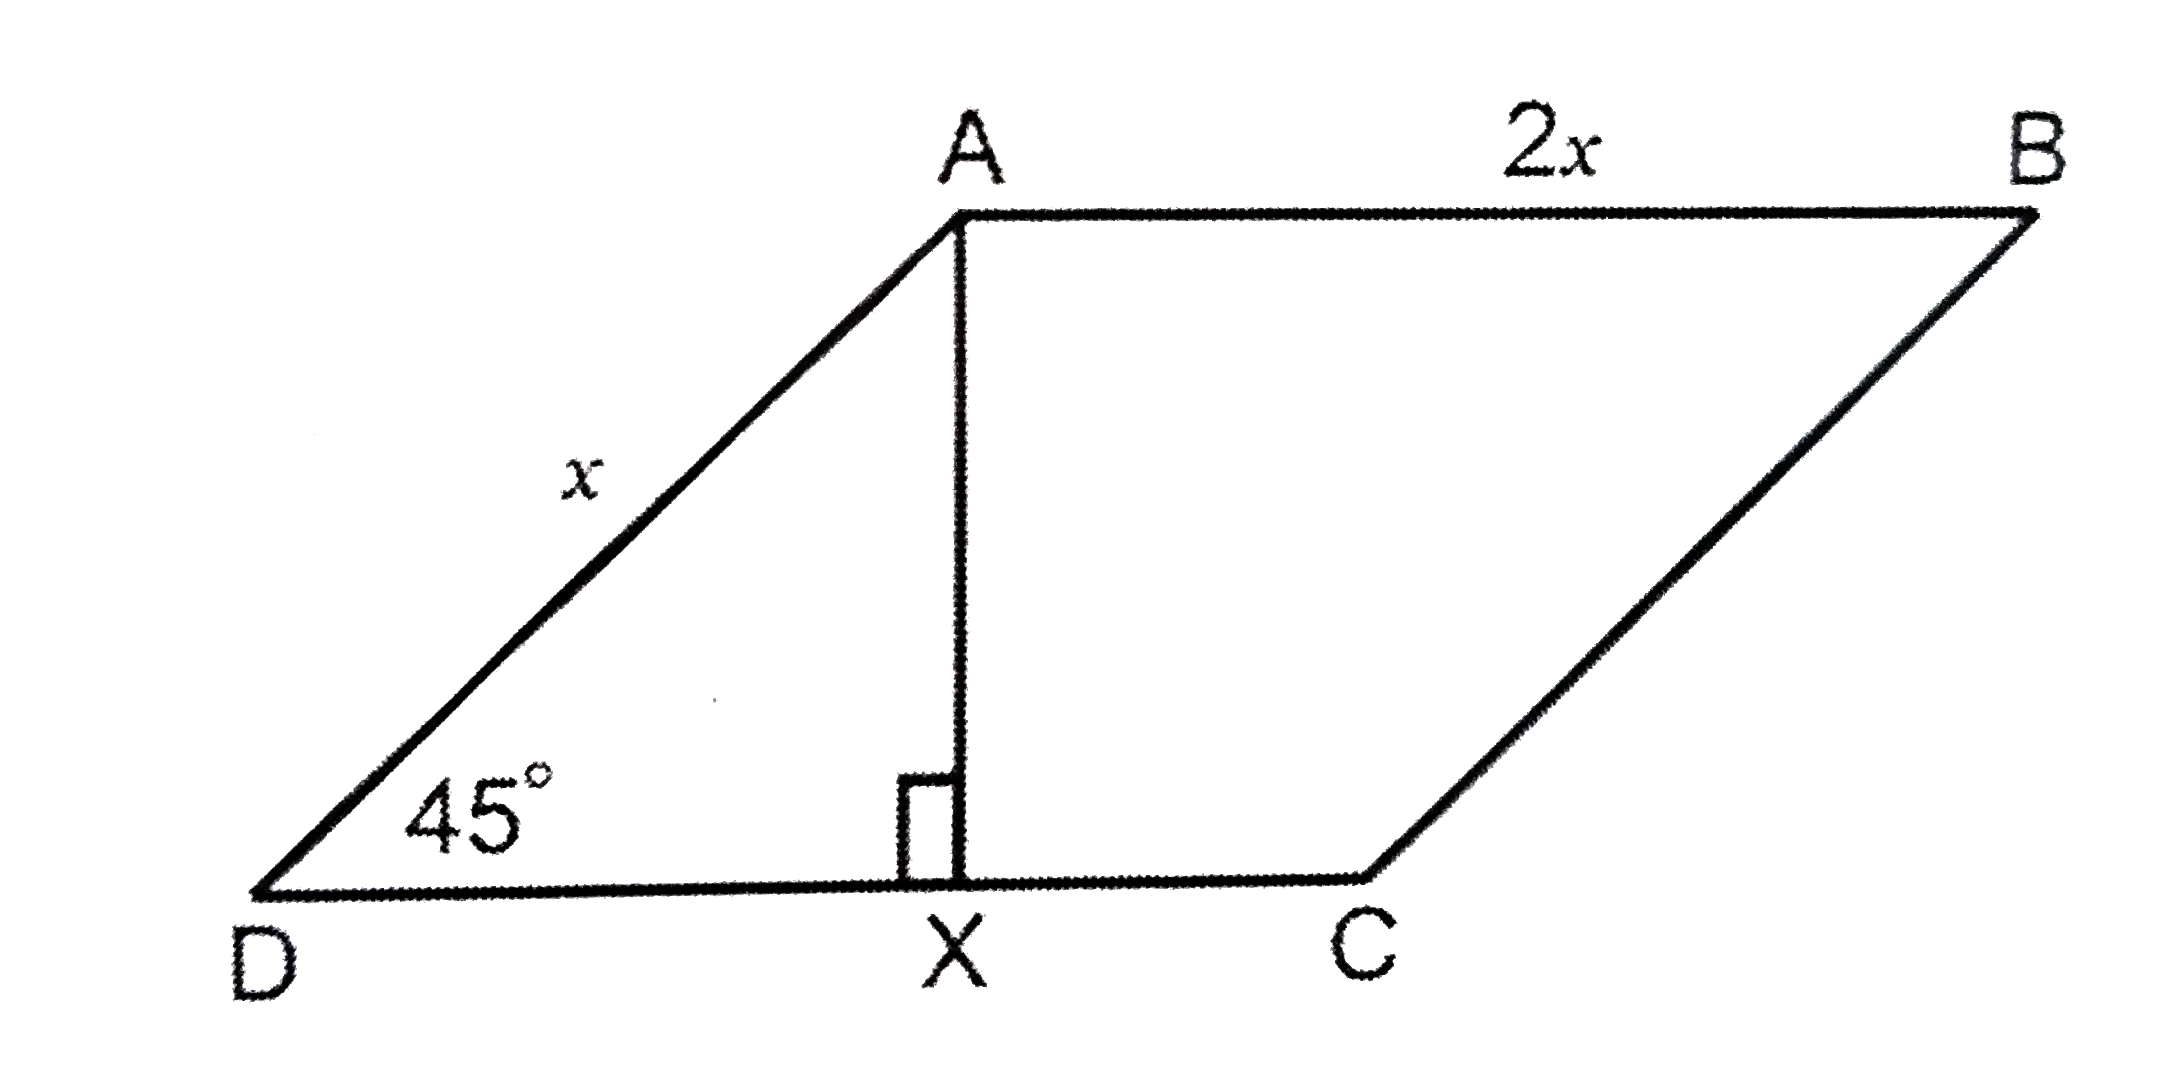 In a parallelogram, the ratio of the two adjacent sides is 1 : 2. If the area of the parallelogram is 20 square units and the angle beween the two sides is 45^(@), what is the area, to the nearest integer, of the rectangle having the sides equal to that of the  parallelogram?